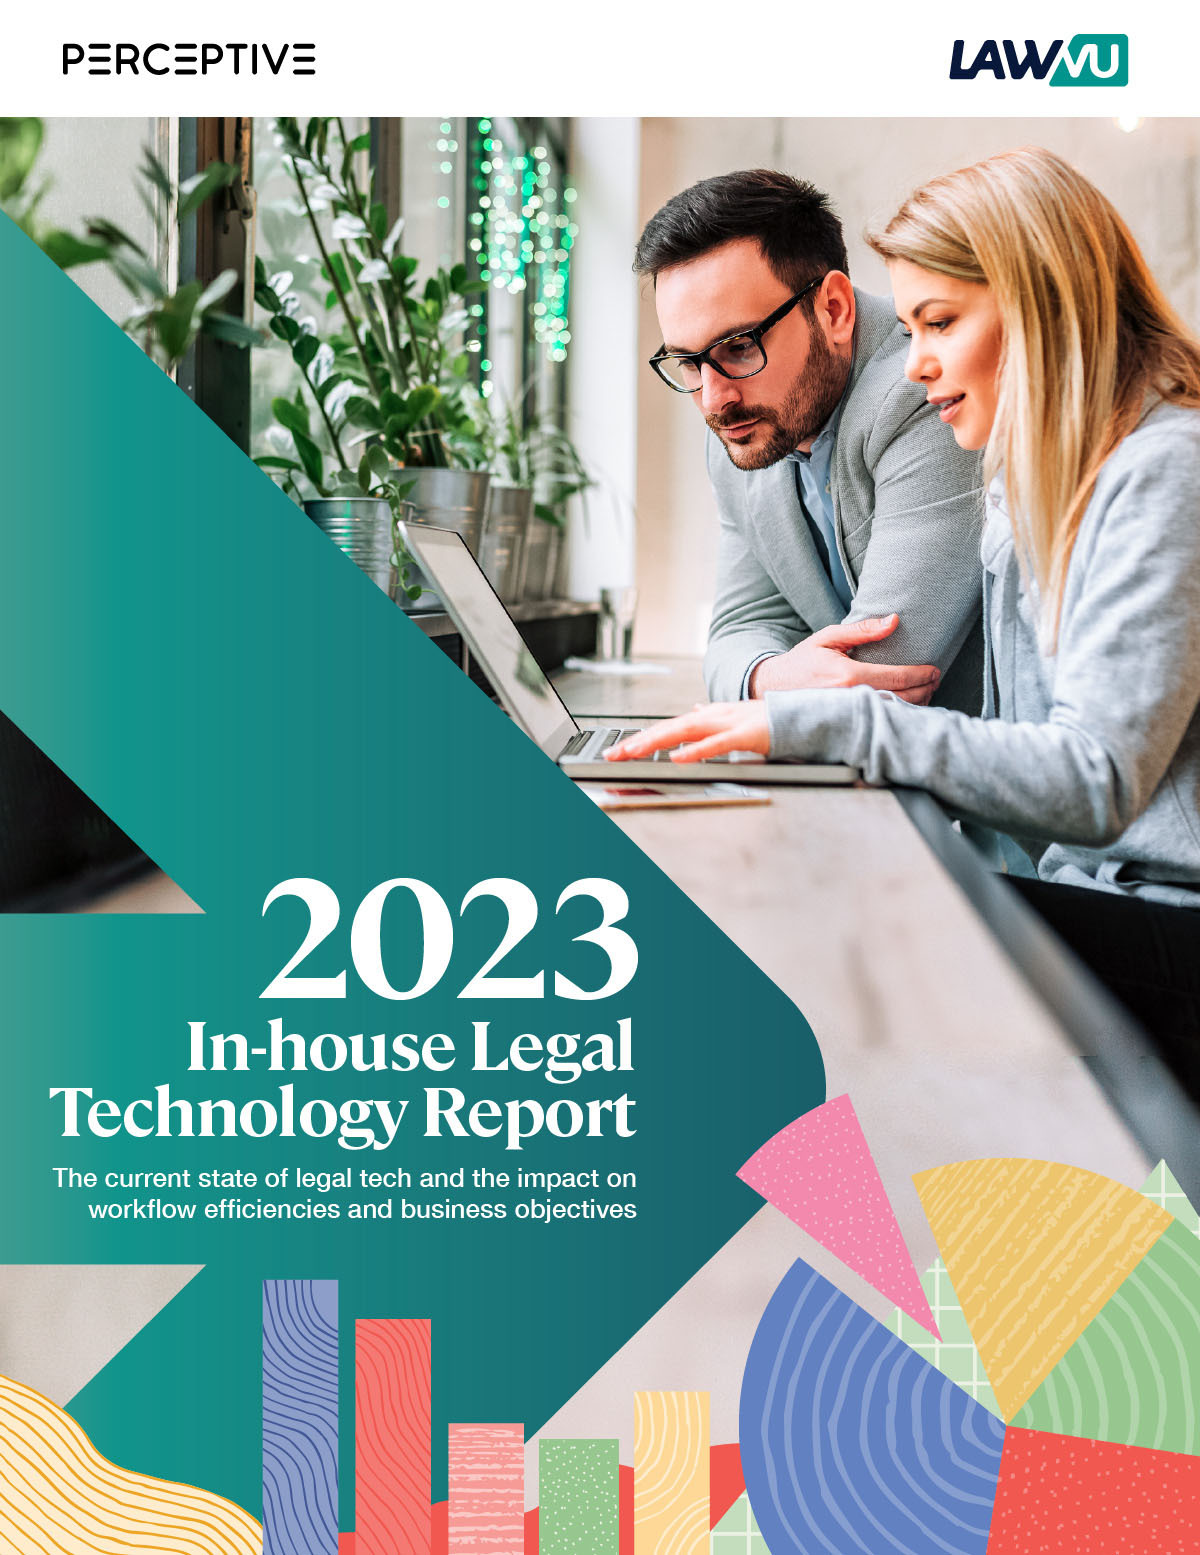 Introducing The 2023 In-house Legal Technology Report